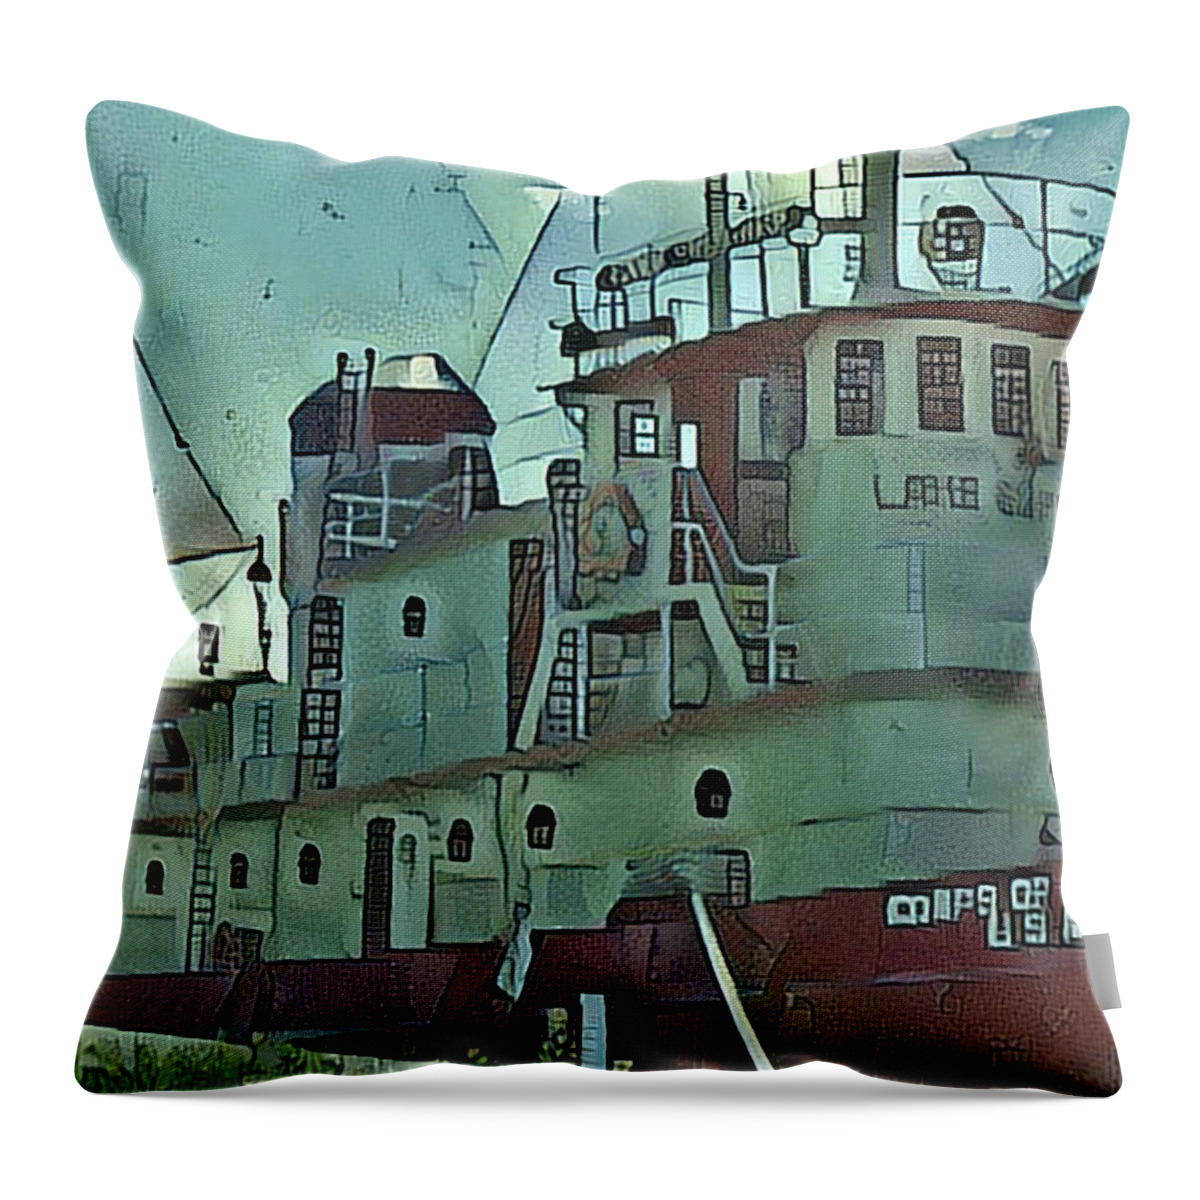 Lake Superior Tug Boat Throw Pillow featuring the digital art Lake Superior Tug Boat CAC day 15 by Cathy Anderson